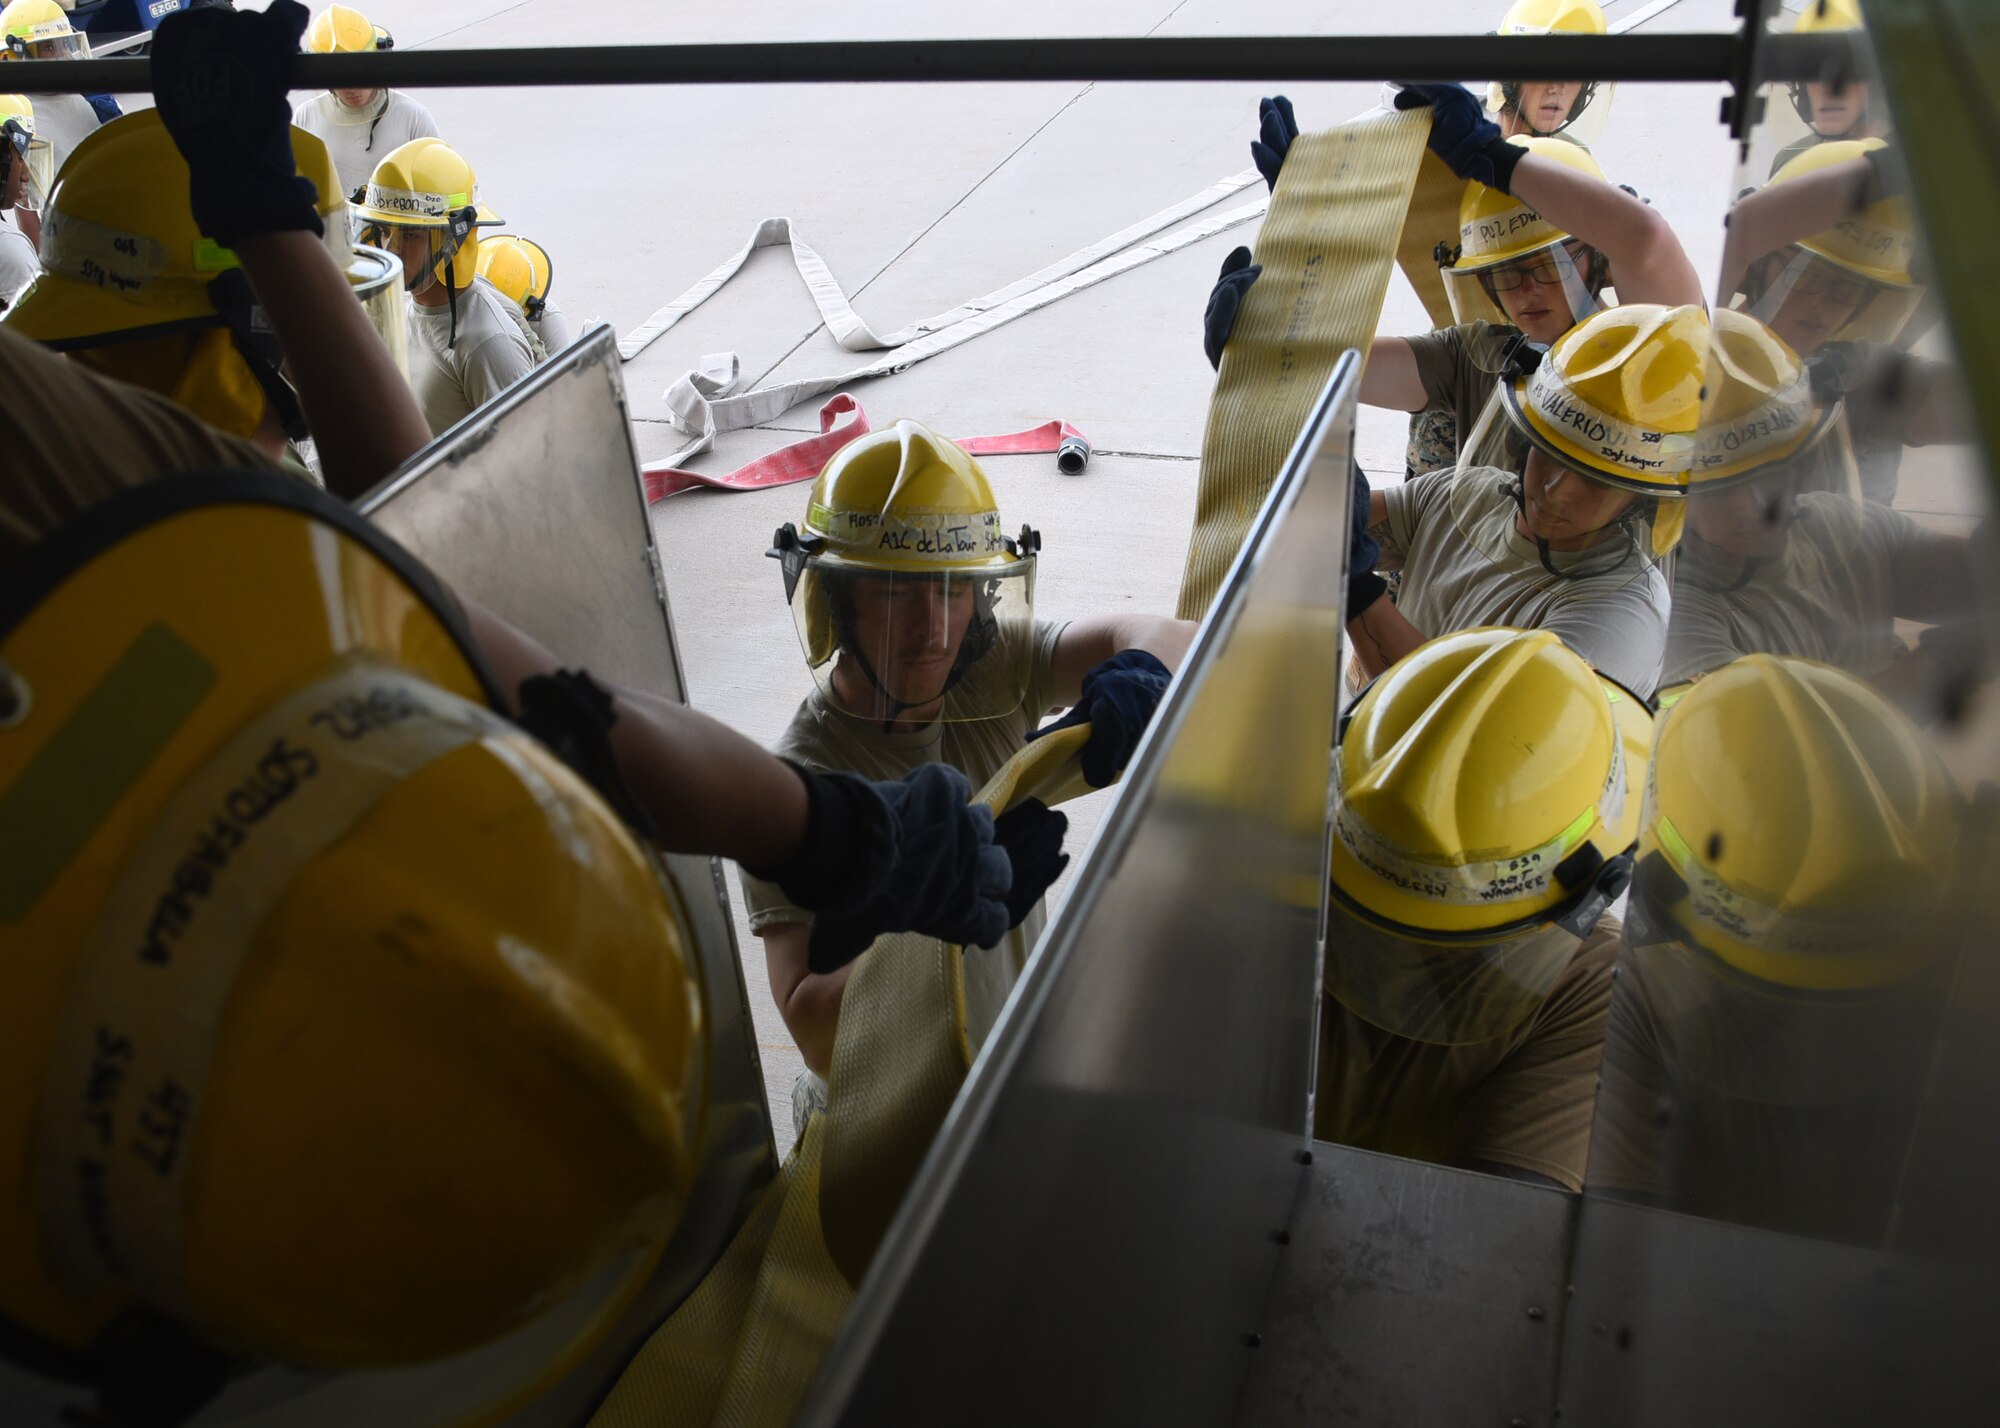 U.S. Military students from 312th Training Squadron practice unraveling fire hoses efficiently from the back of a fire truck outside the Louis F. Garland Department of Defense Fire Academy on Goodfellow Air Force Base, Texas, July 11, 2019. Students were trained in a stress-induced environment to practice valuable skills such as remaining calm, working in teams and effective communication, all of which are needed in real-life firefighting scenarios.  (U.S. Air Force Photo by Airman 1st Class Abbey Rieves/Released)